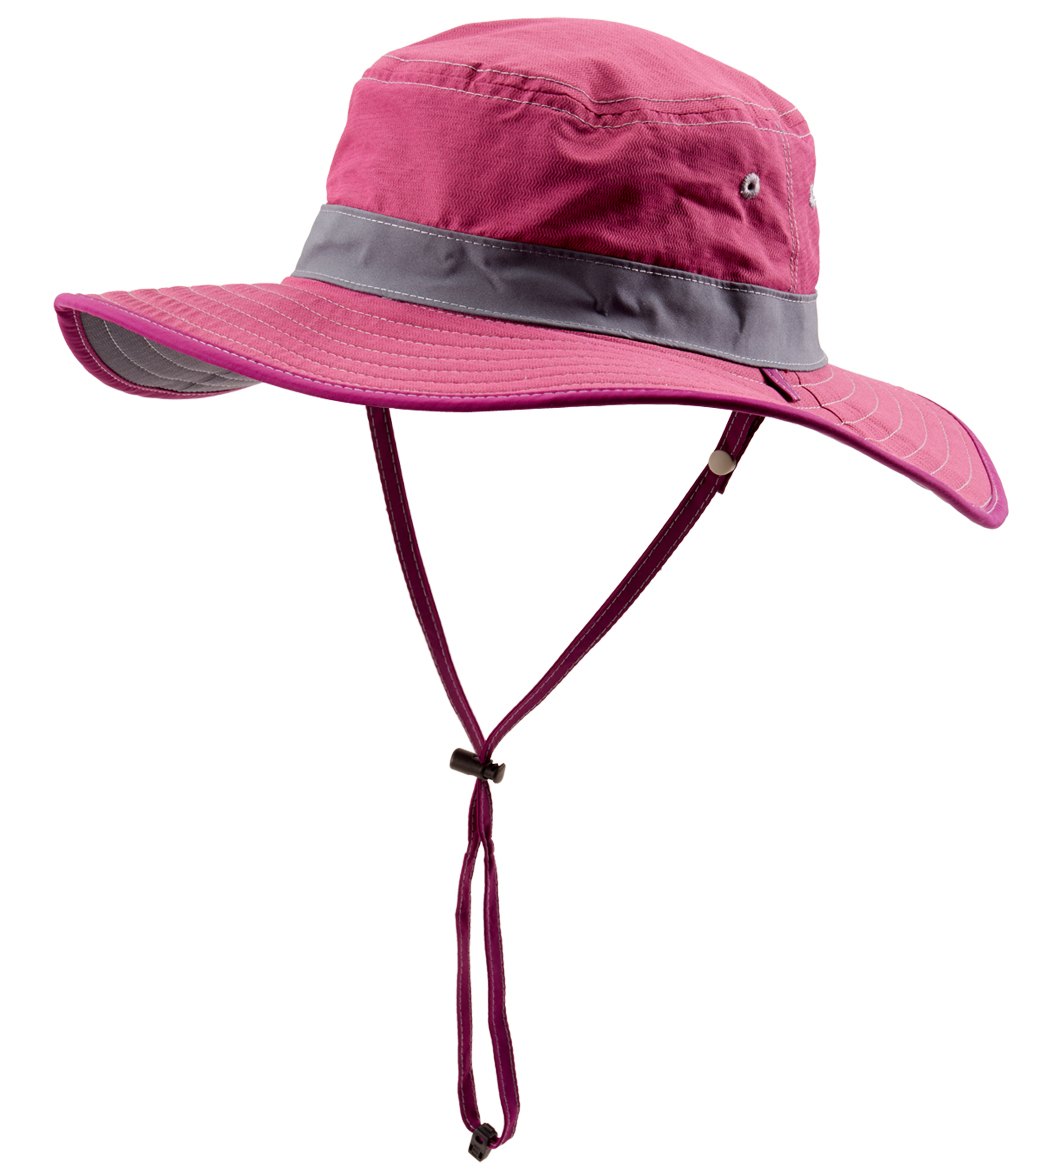 Sunday Afternoons Women's Caribbean Polyester Braid Sun Hat at